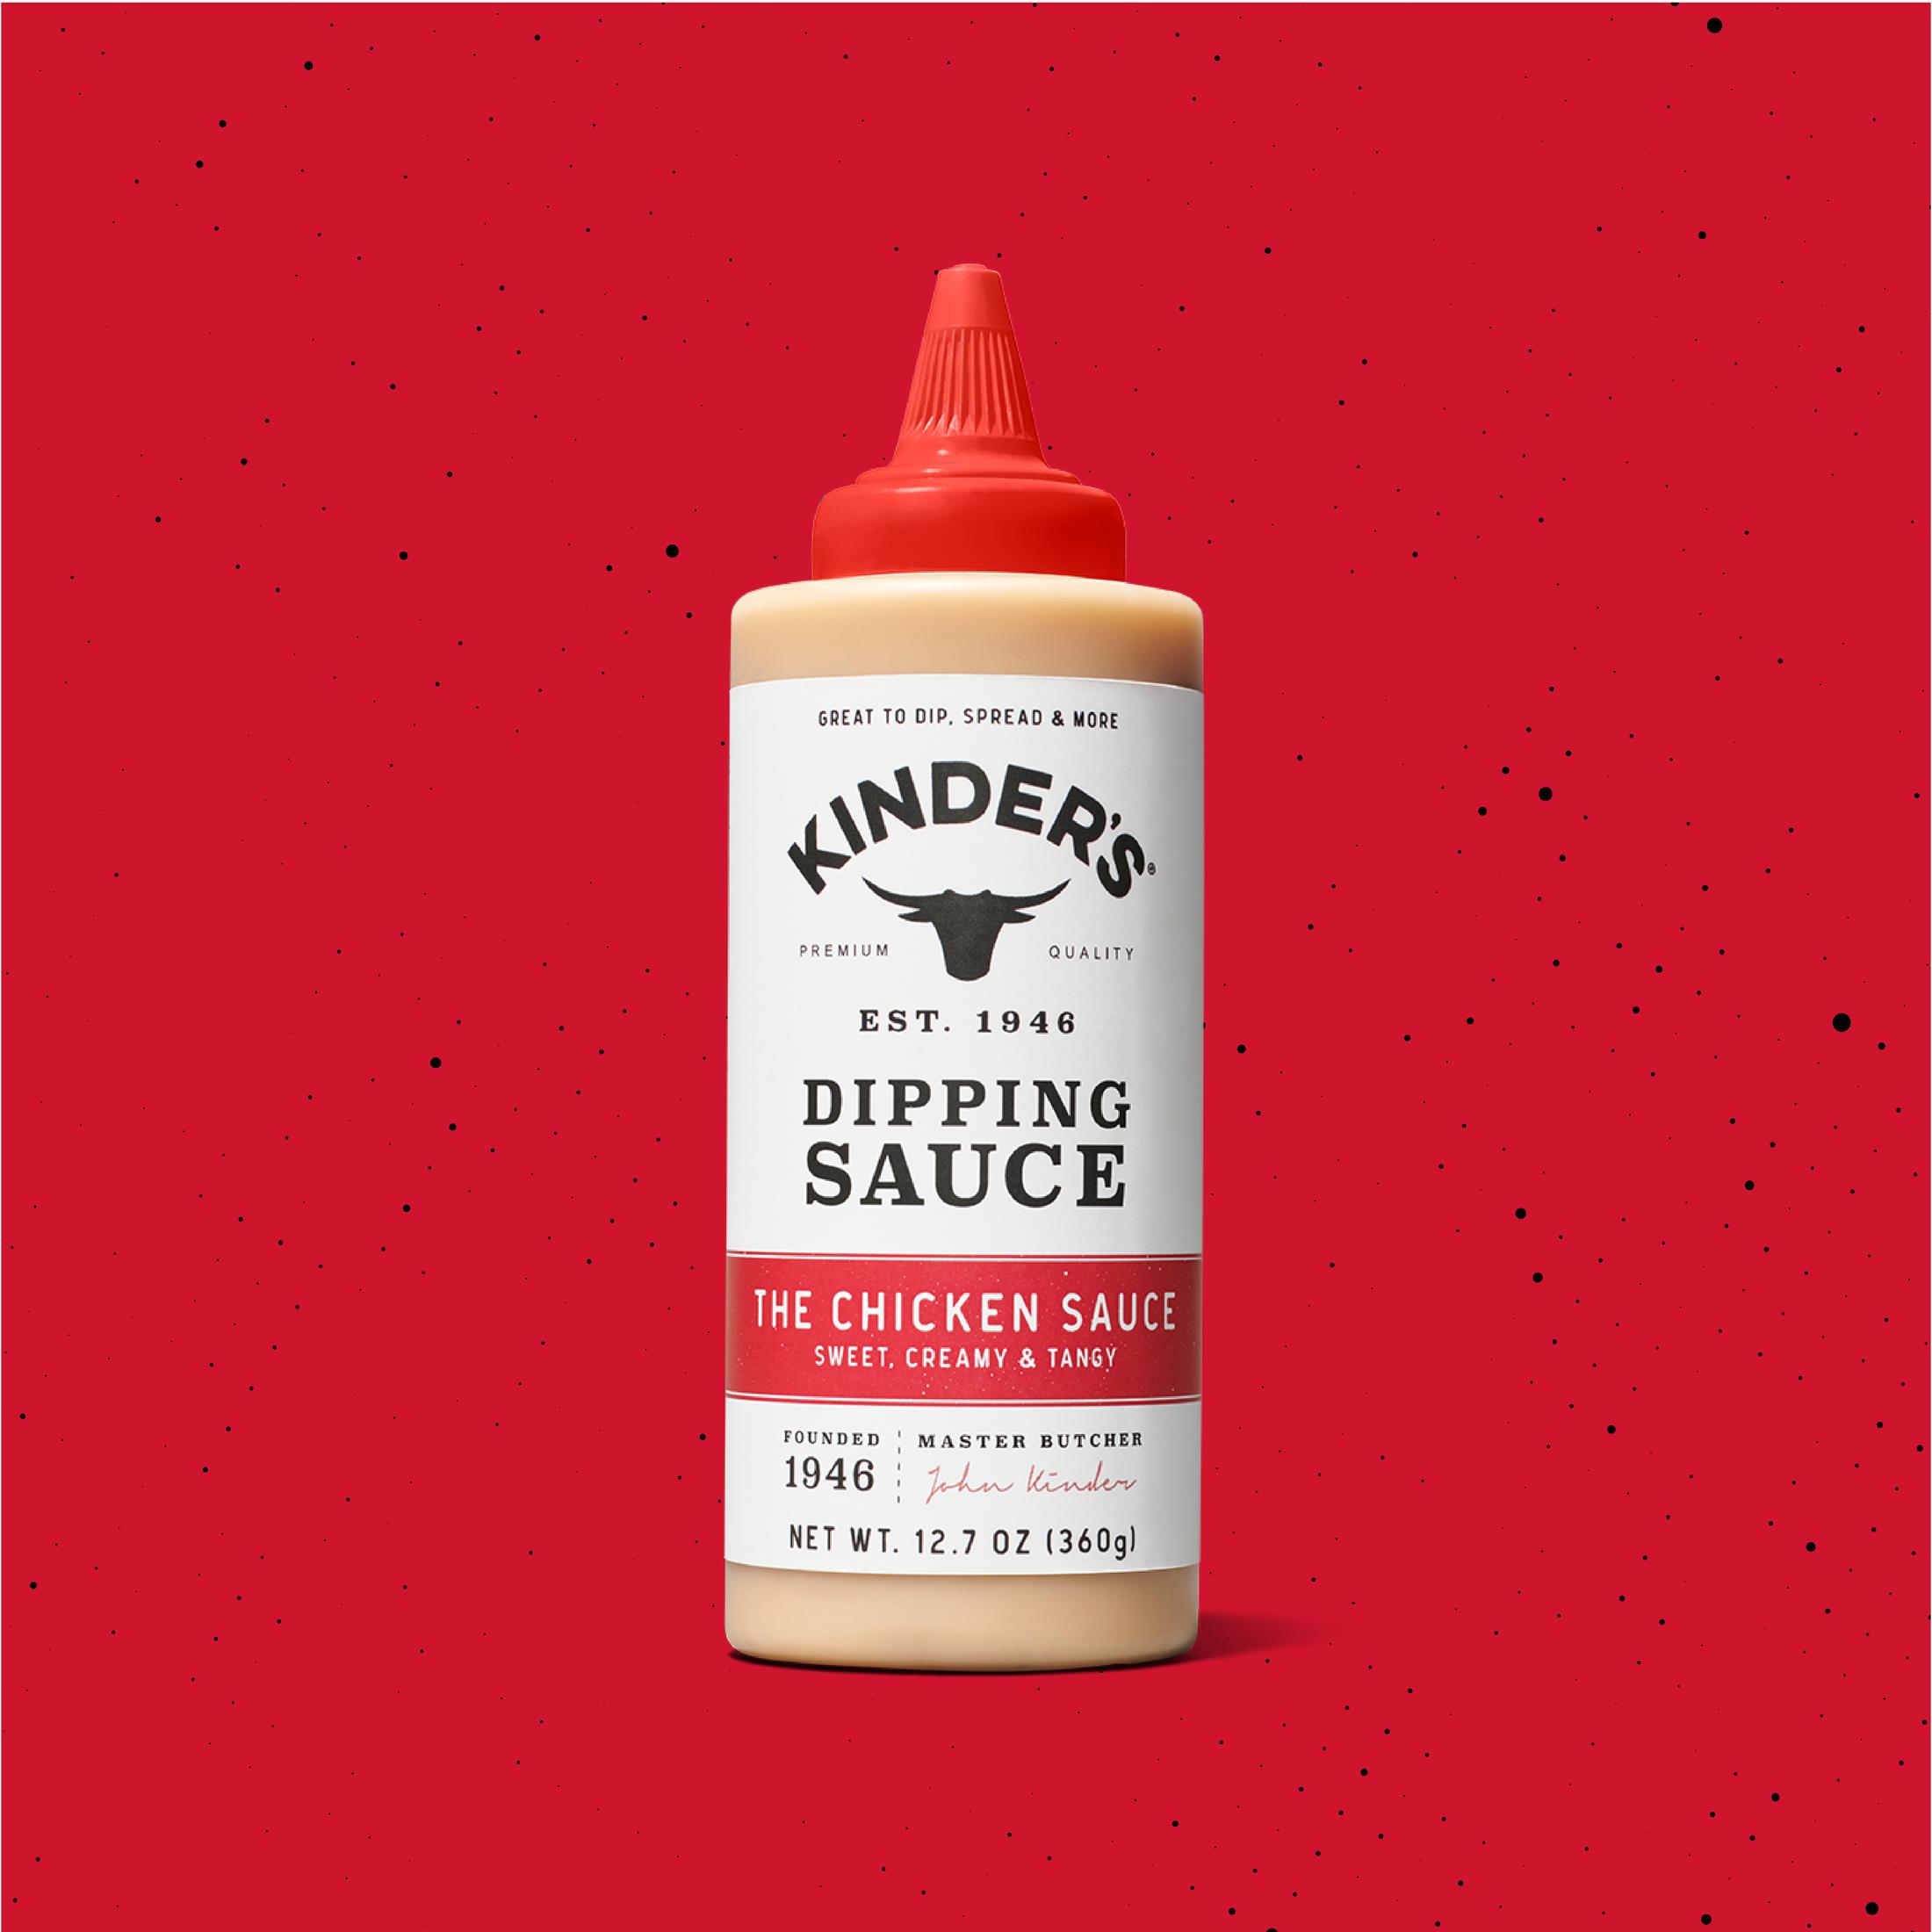 Kinders The Chicken Sauce Sweet Creamy & Tangy Dipping Sauce 12.7 oz - image 5 of 8